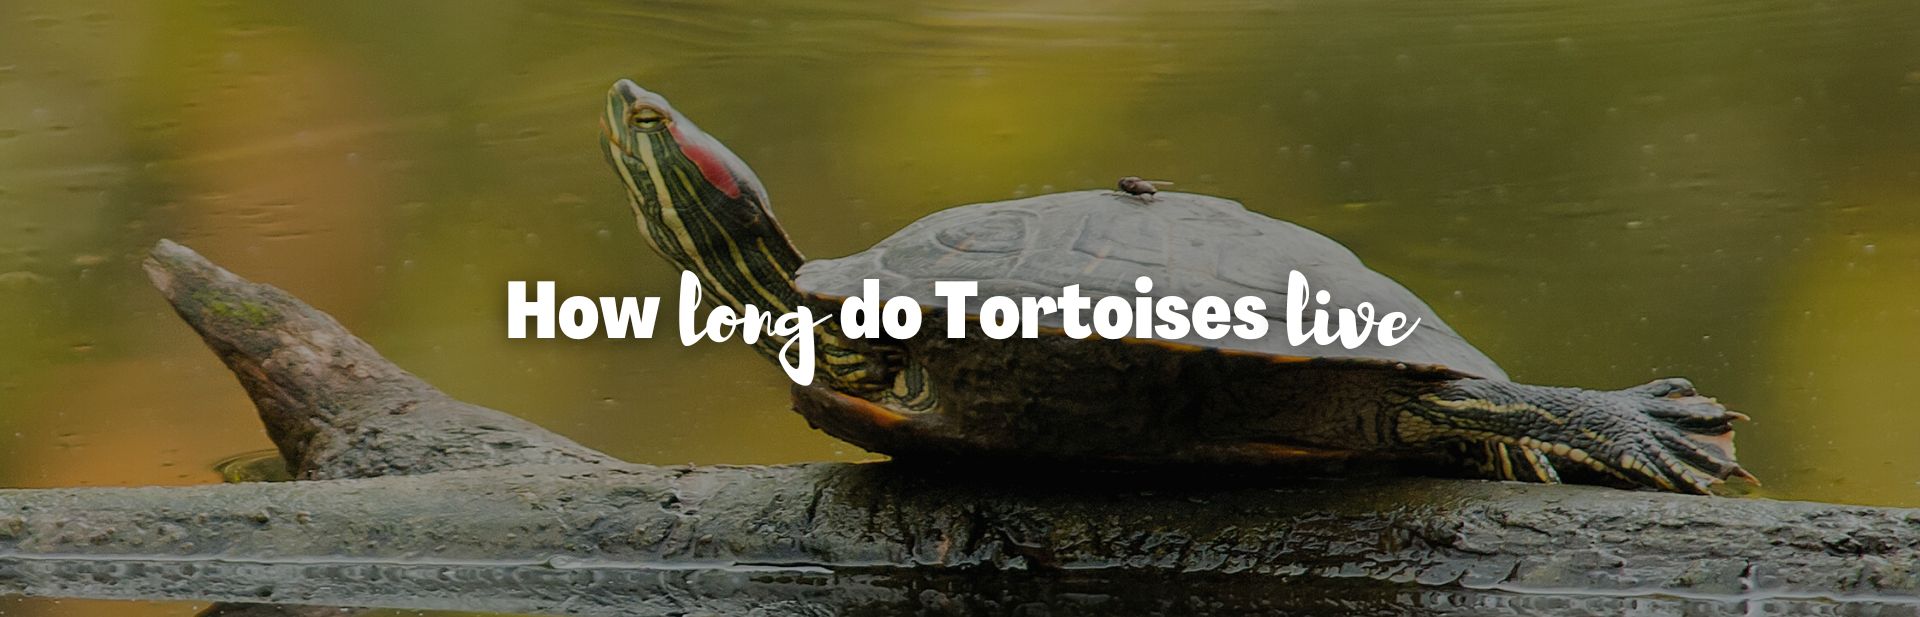 How Long Do Tortoises Live? Everything You Need to Know About Their Lifespan